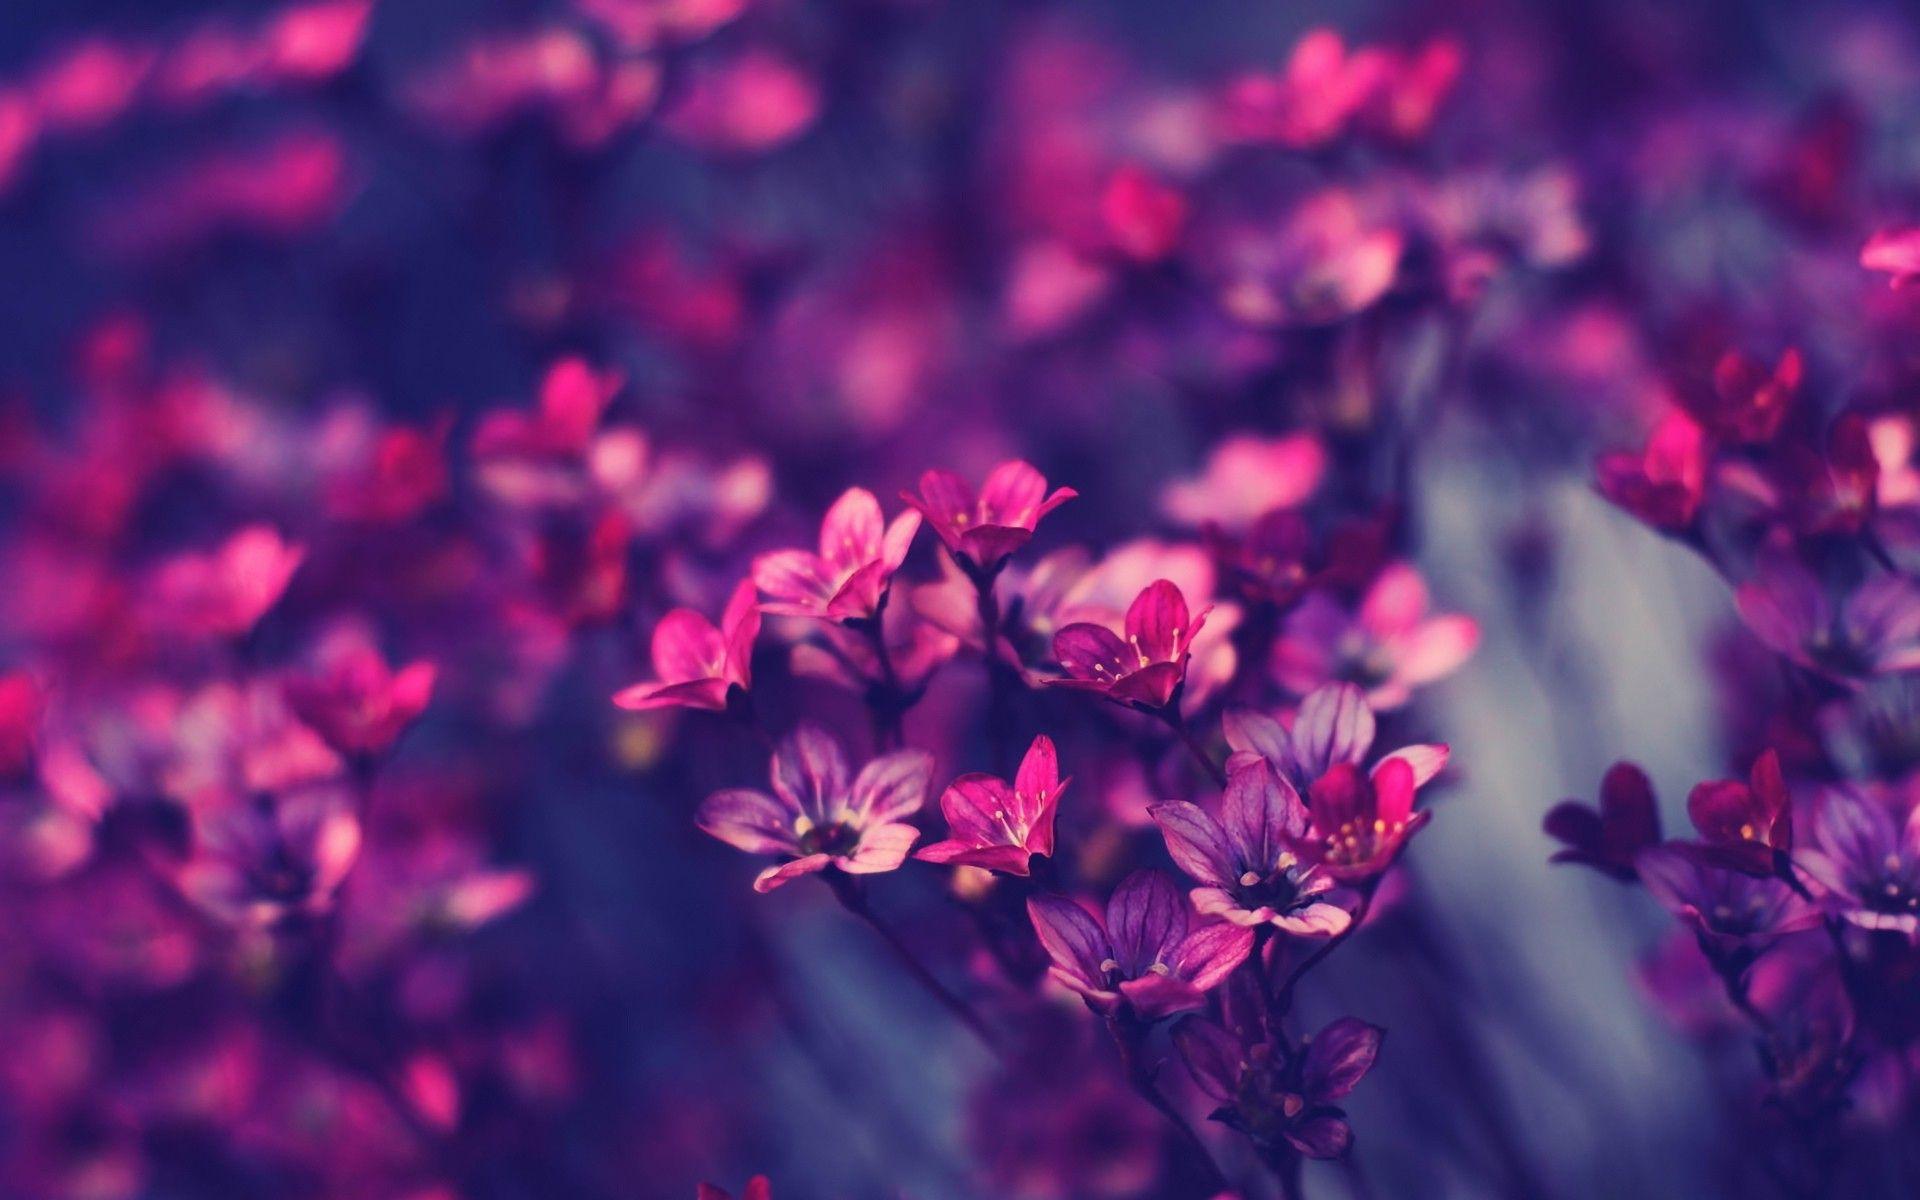 Flower backgrounds Tumblr ·① Download free stunning wallpapers for